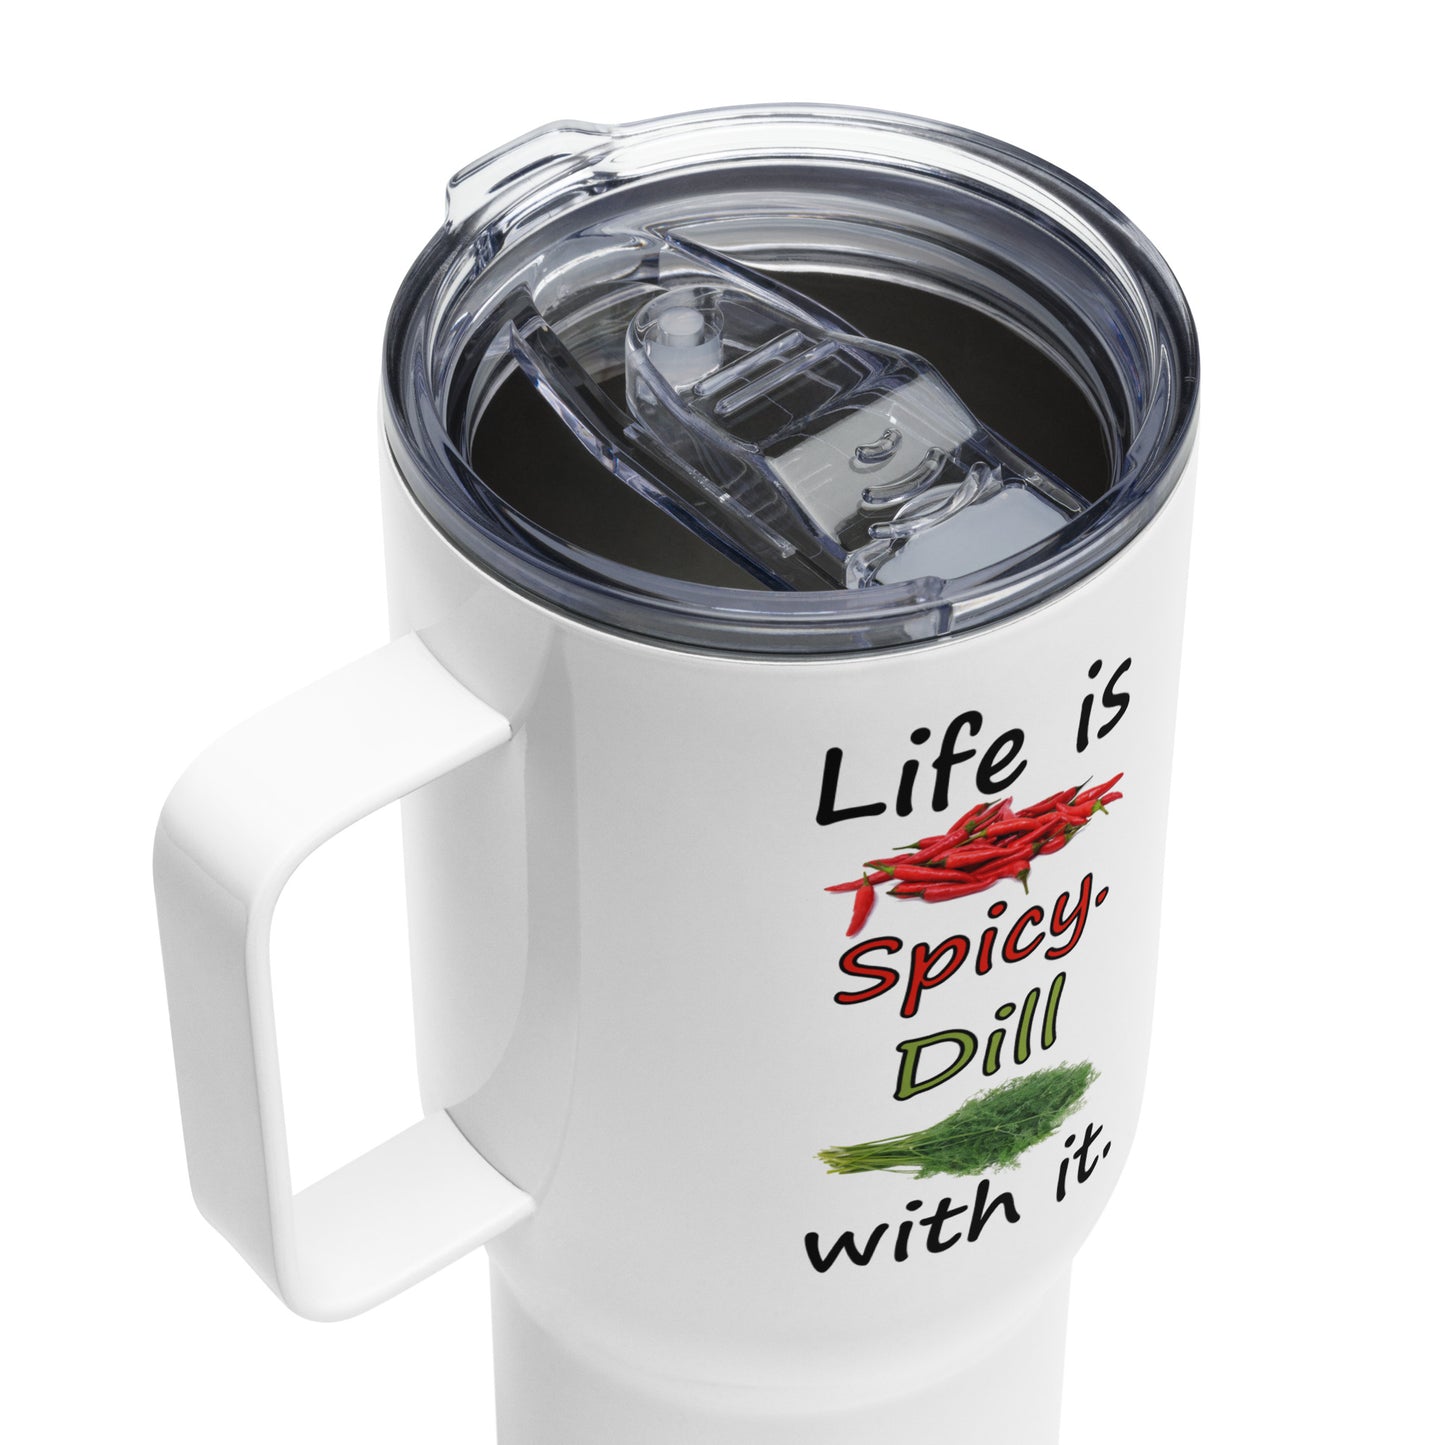 Stainless steel travel mug with handle. Holds 25 ounces of hot or cold liquids. Fits most car cup holders. Features double-sided phrase: Life is spicy. Dill with it, and accompanying chili pepper and dill weed images. Comes with spill proof plastic lid. Detail view of lid.